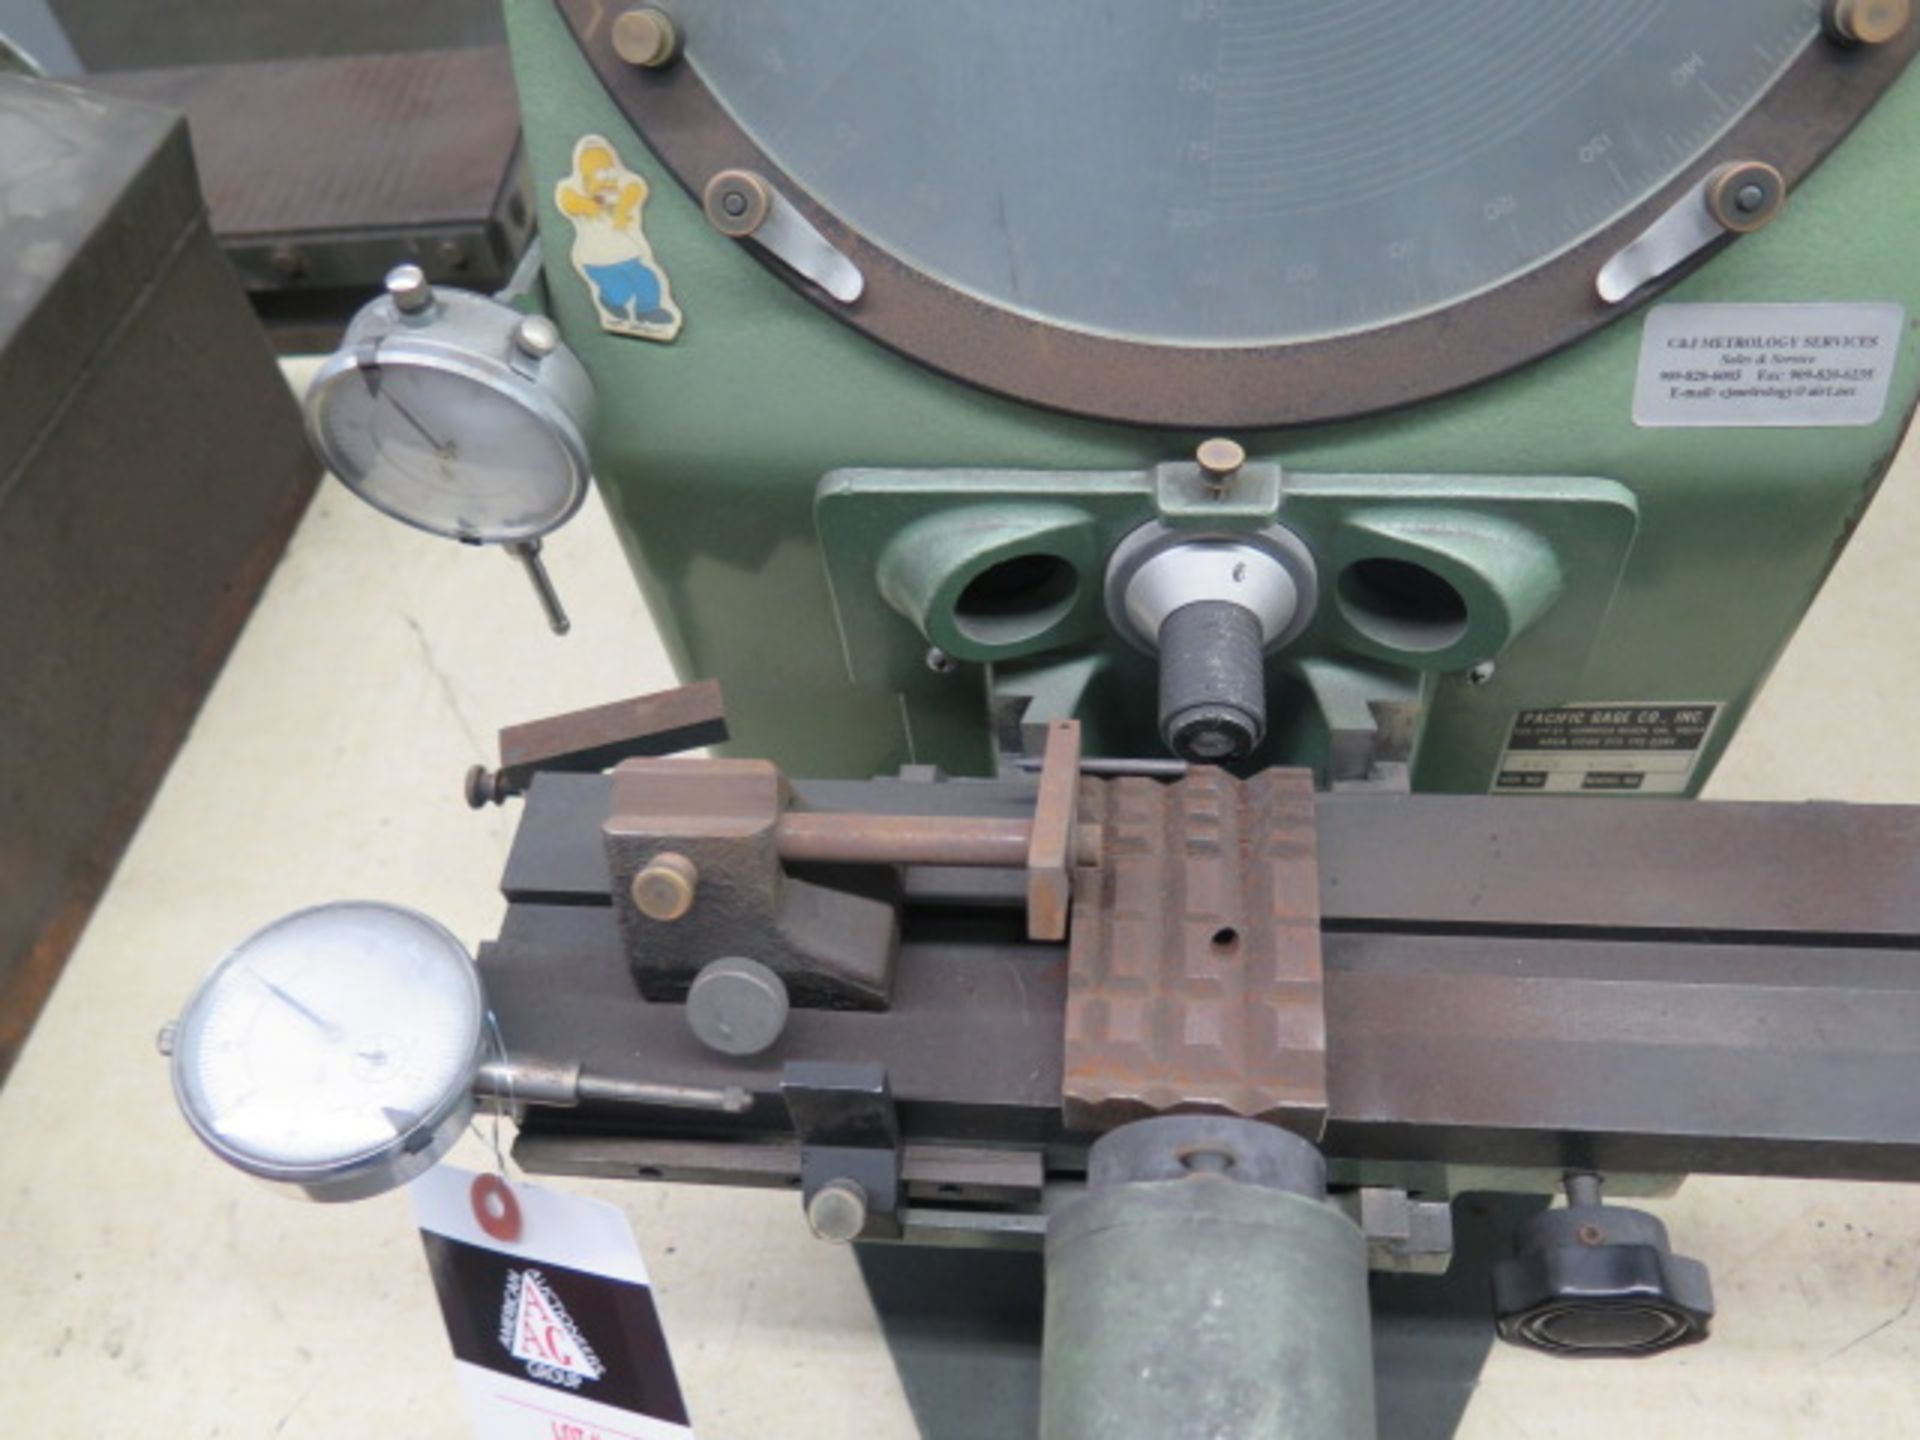 Pacific Gage Optical Comparator w/ Dial Indicator Readouts (SOLD AS-IS - NO WARRANTY) - Image 5 of 9